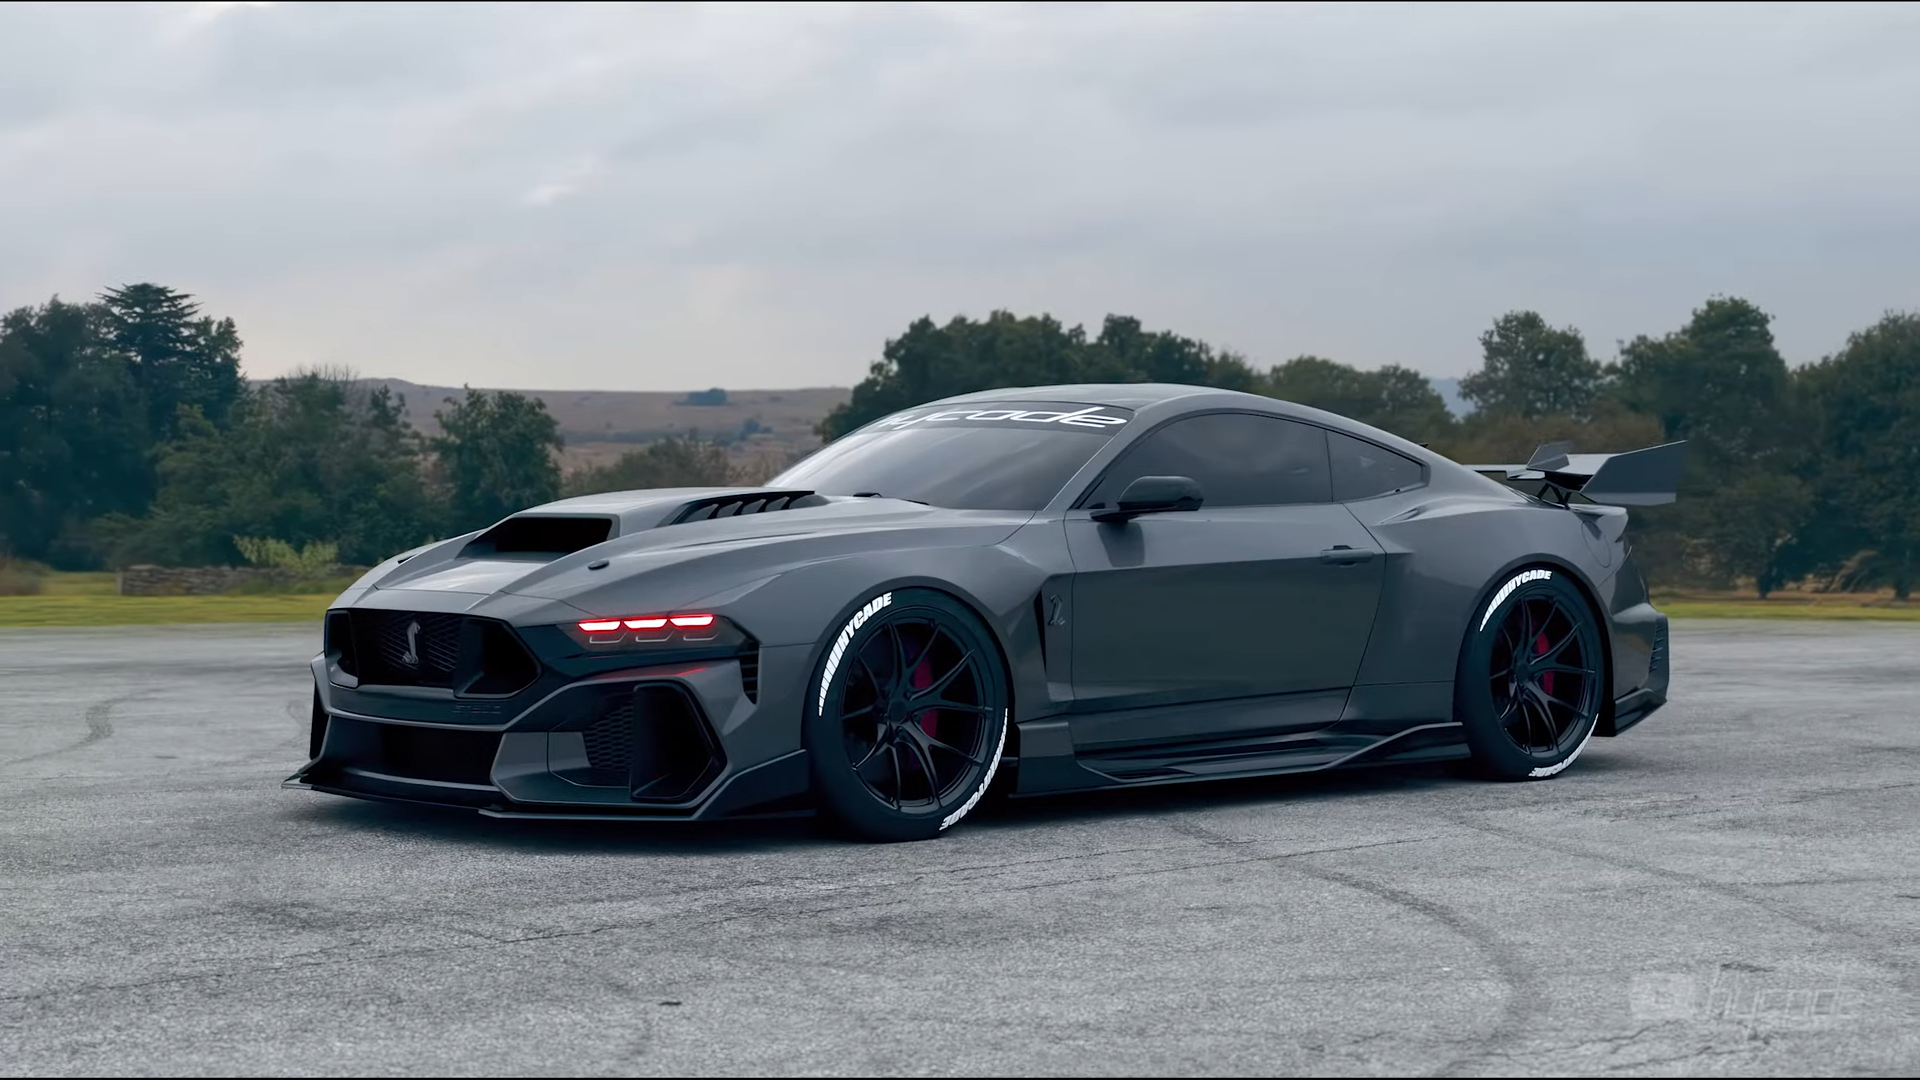 Ford Mustang GT 2024 Custom Design Wide Body Kit by Hycade Osta